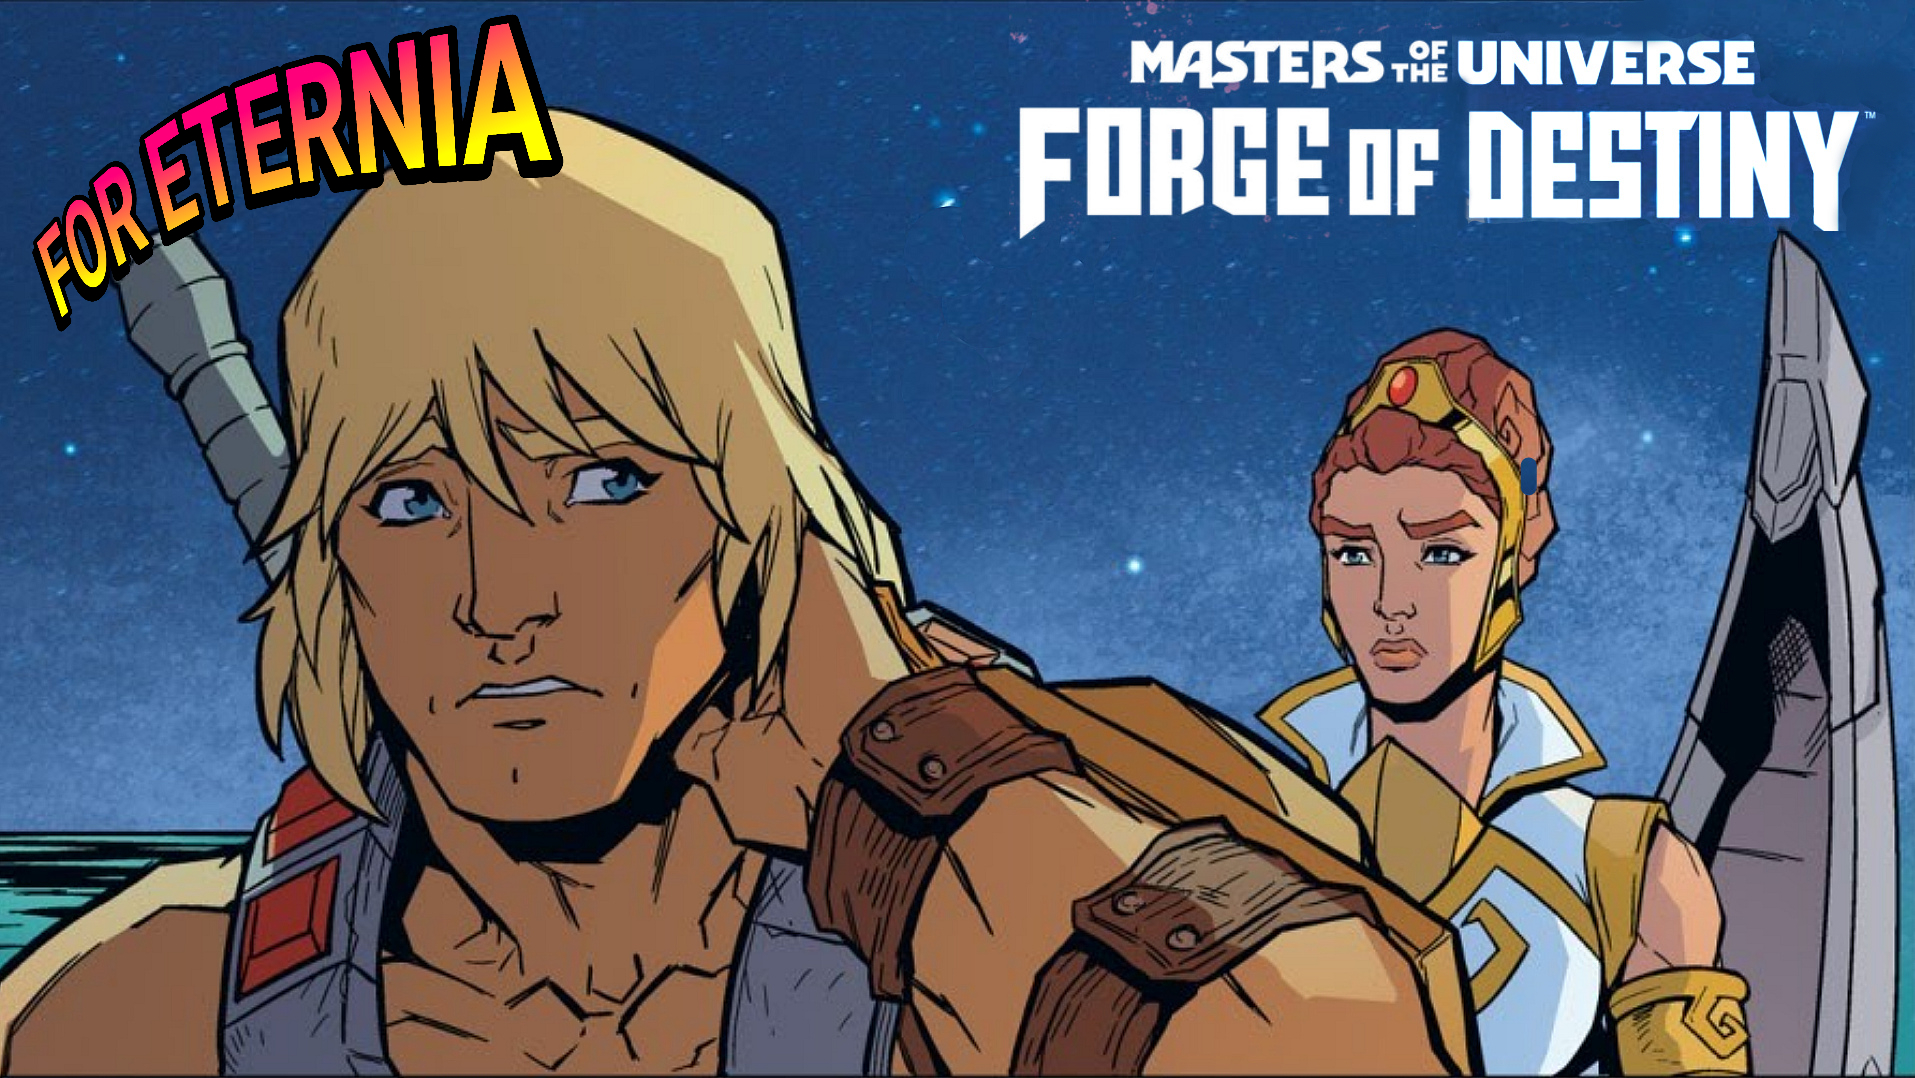 Five Page Preview of Dark Horse Comics ”Masters of the Universe: Forge of Destiny” Issue #3 is Released